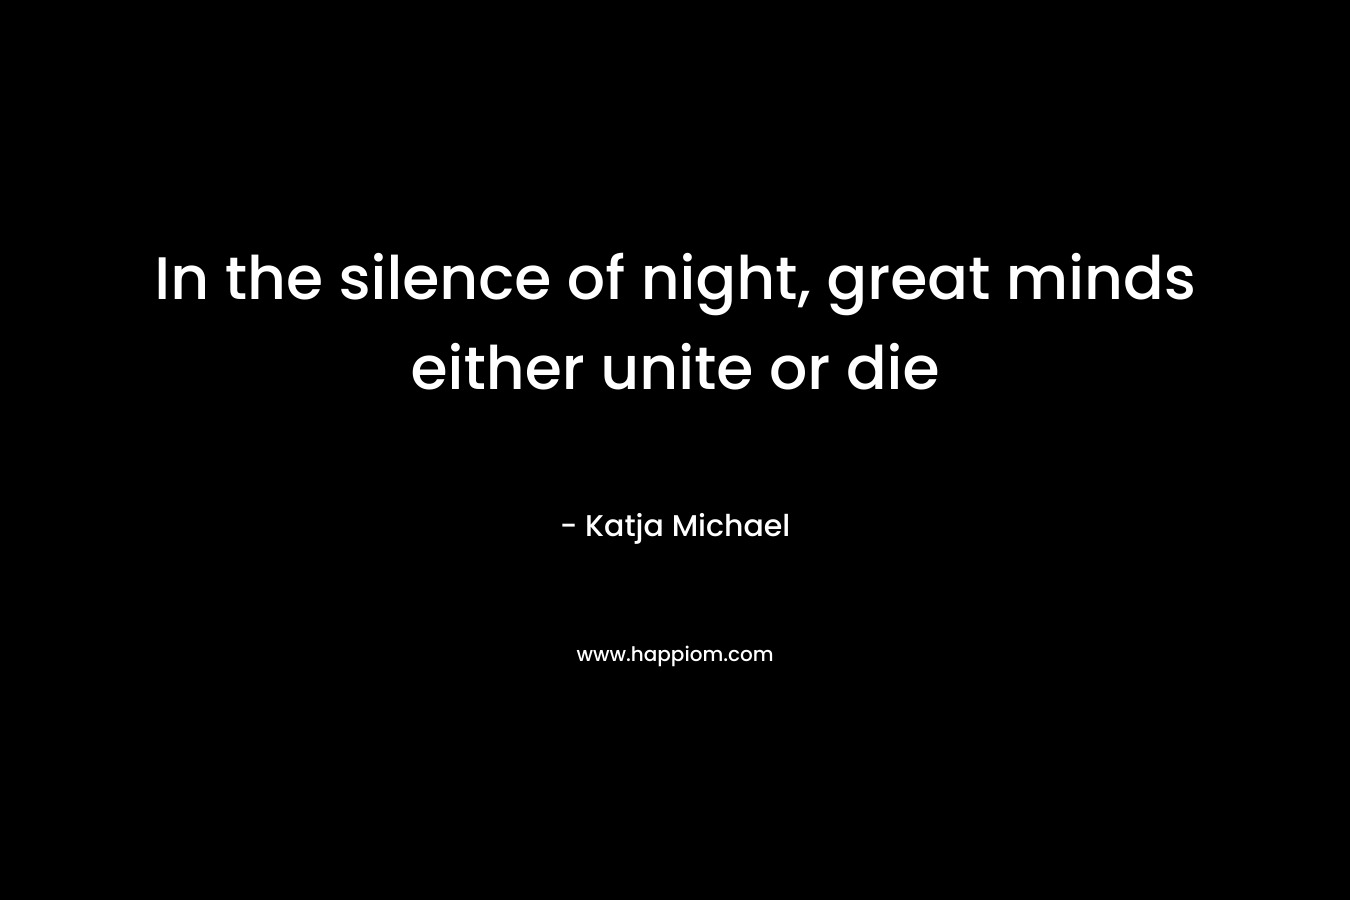 In the silence of night, great minds either unite or die